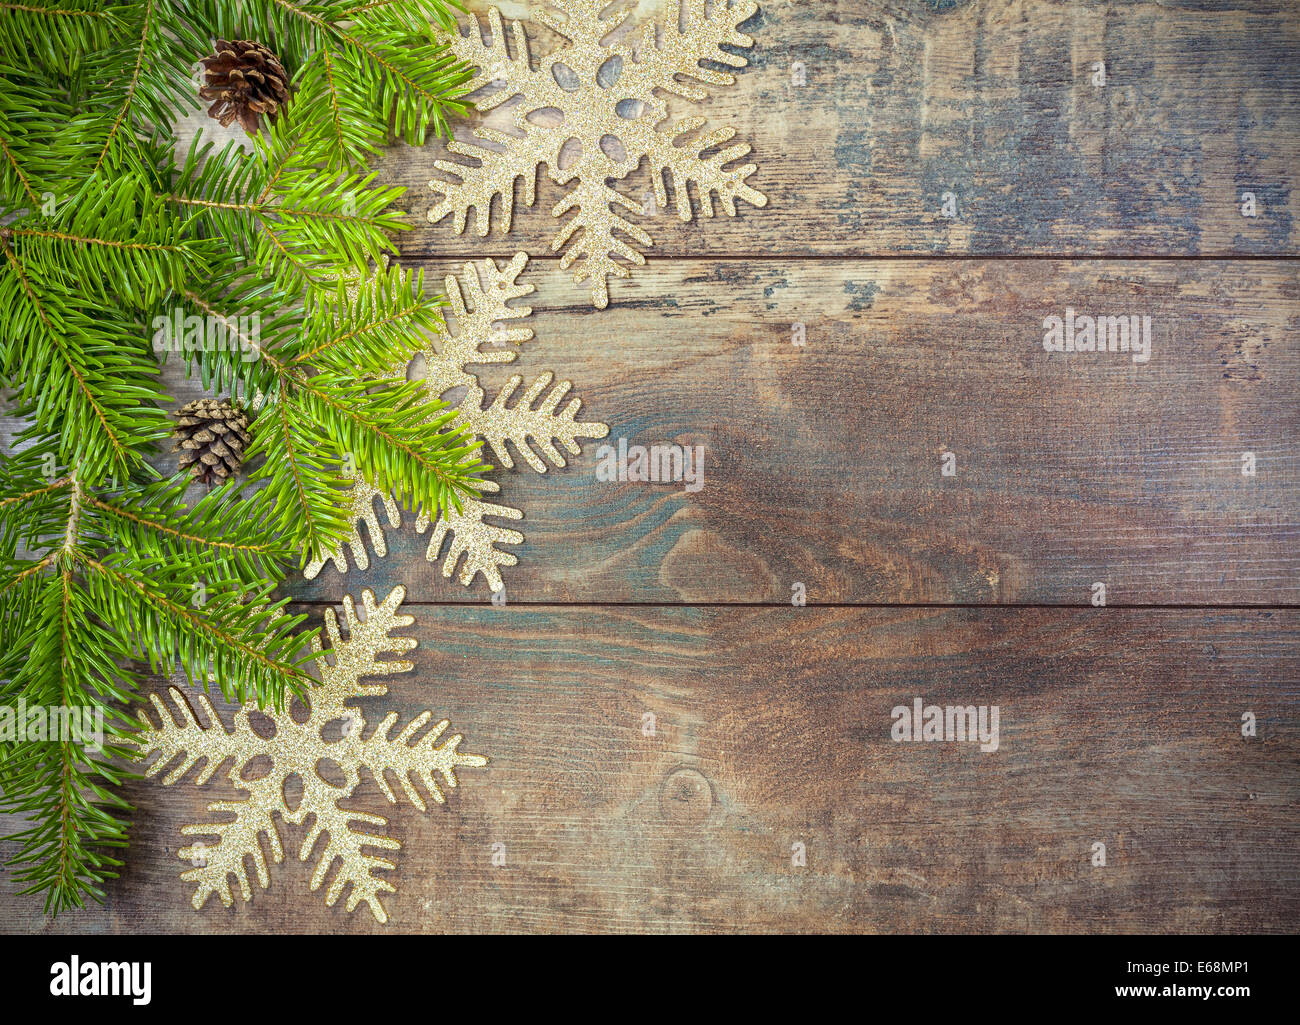 Christmas background, decoration on a rustic wooden board. Stock Photo